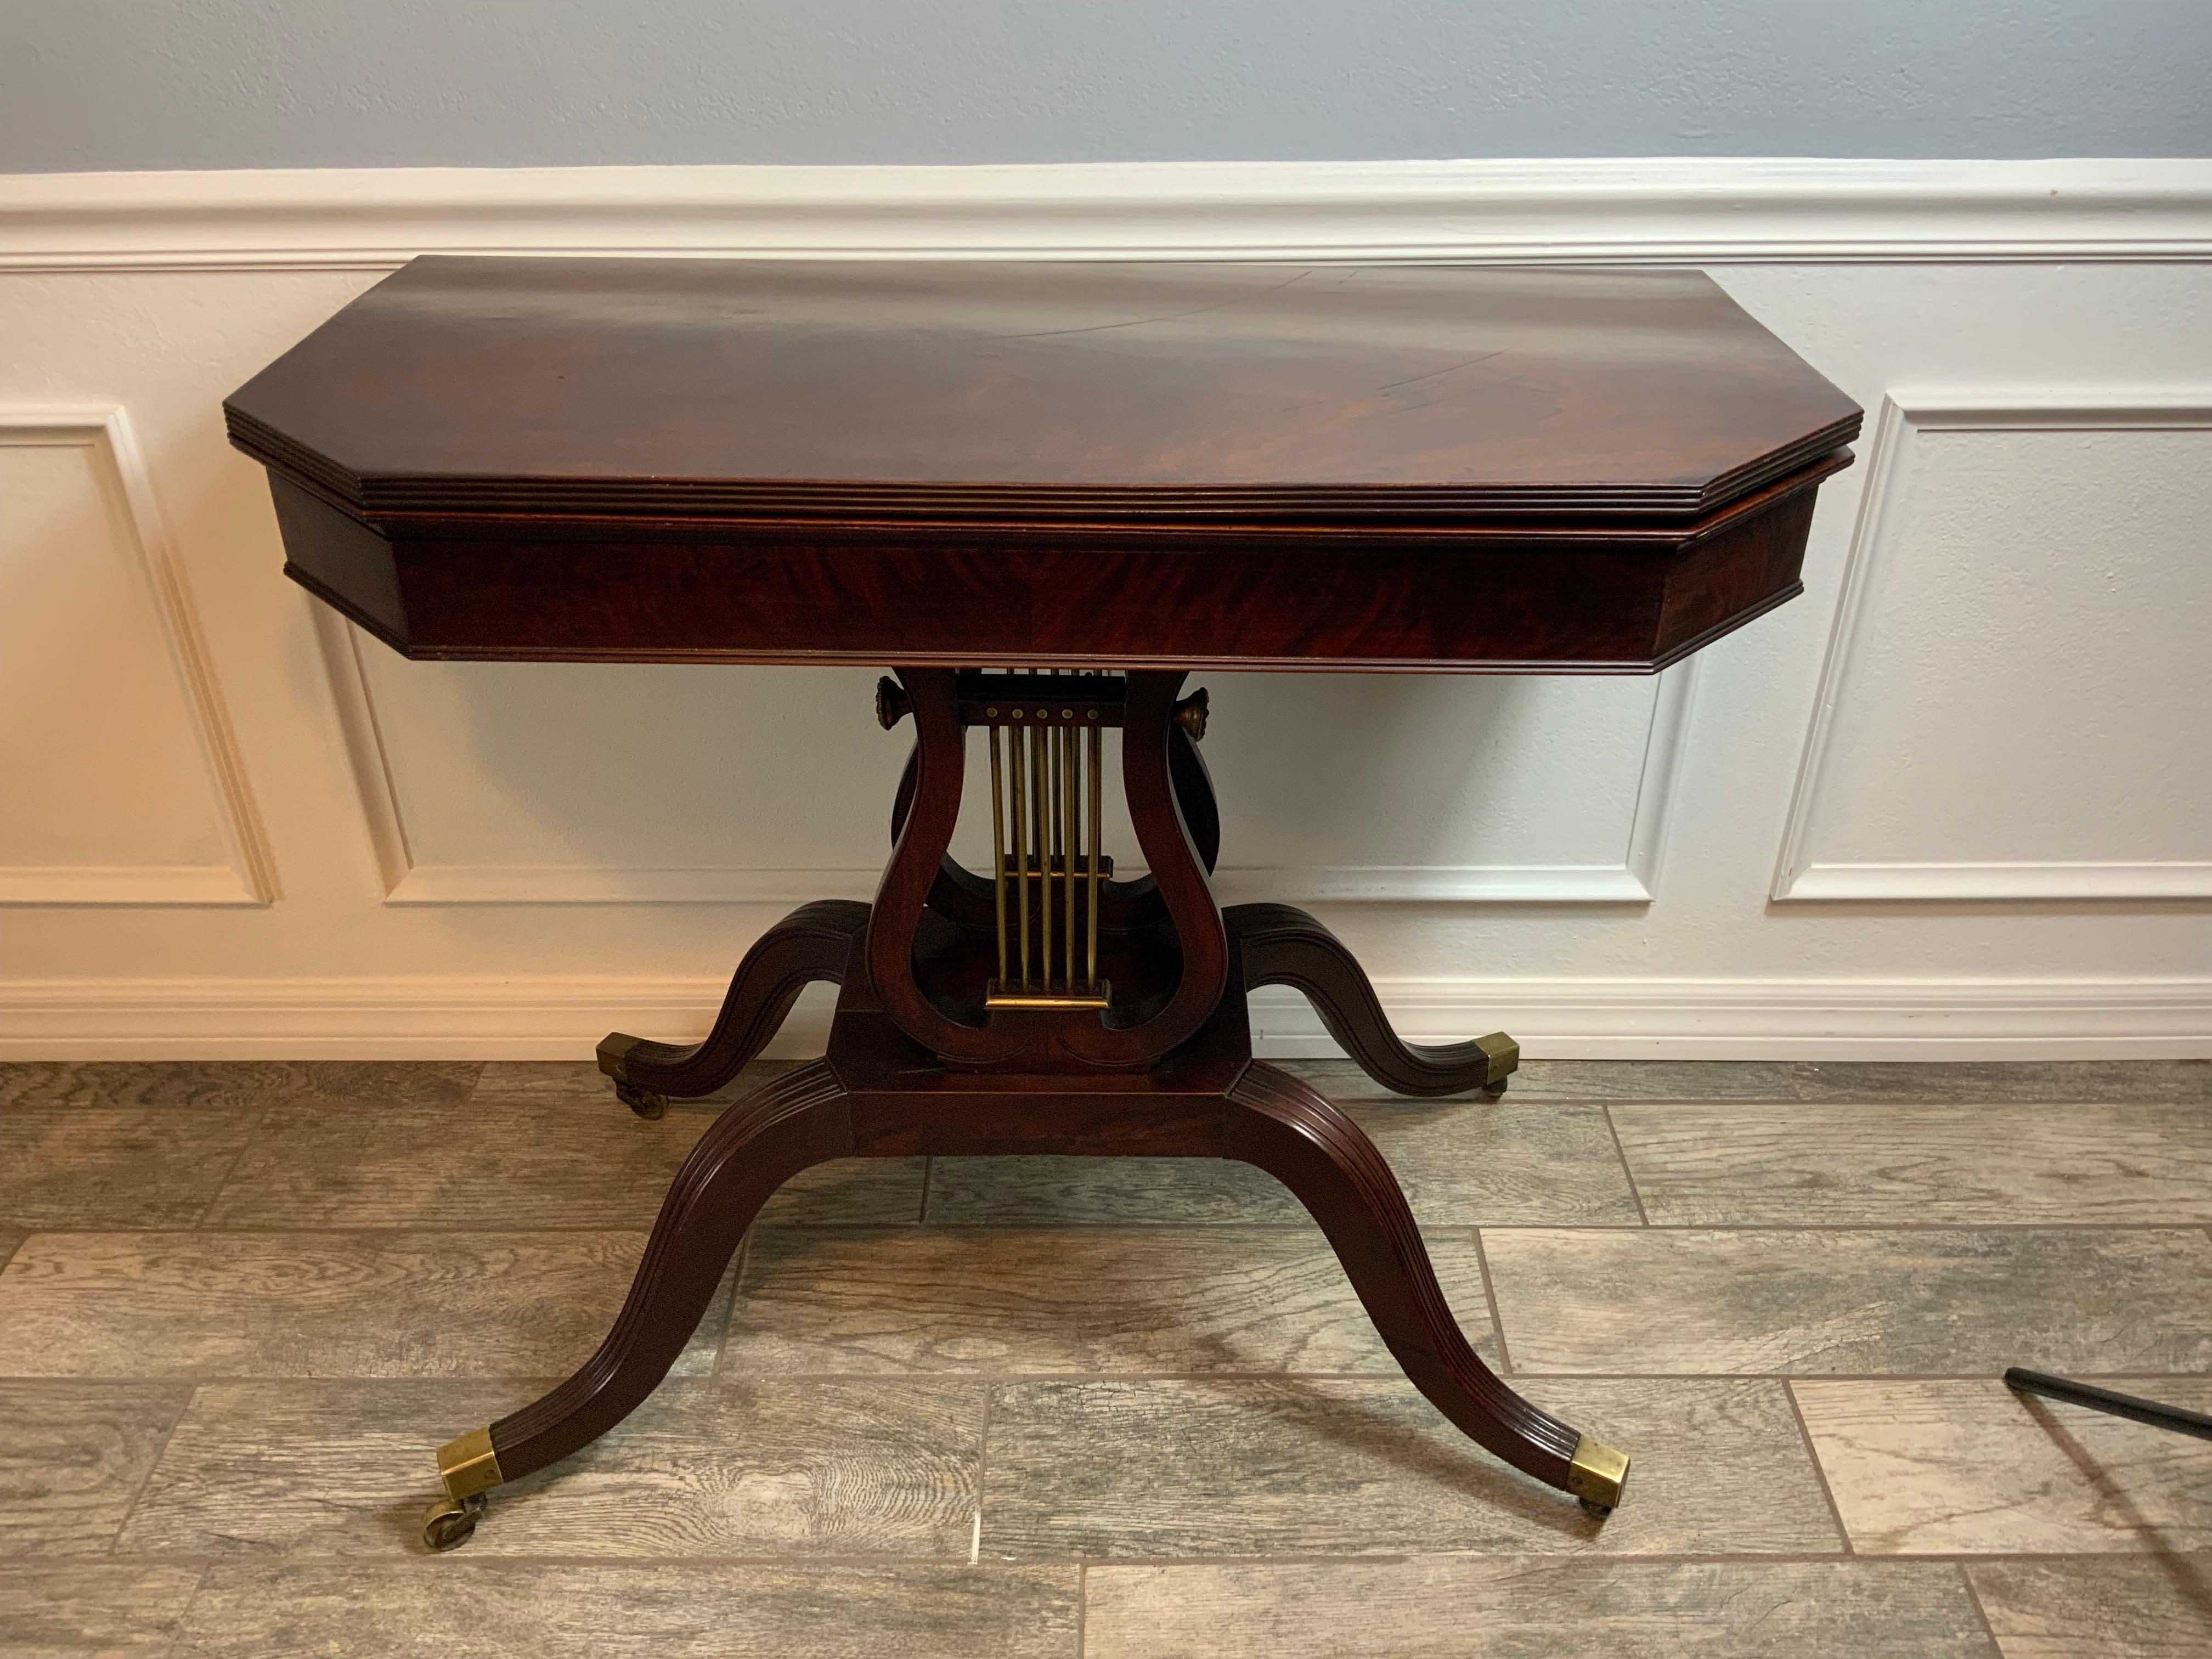 A very nice Federal  Mahogany Lyre / harp base card table 1800-1815.  Original surface with an excellent color and patina on the nicely figured solid Cuban Mahogany one board canted corner reeded edge tops..  White pine secondary case wood under the